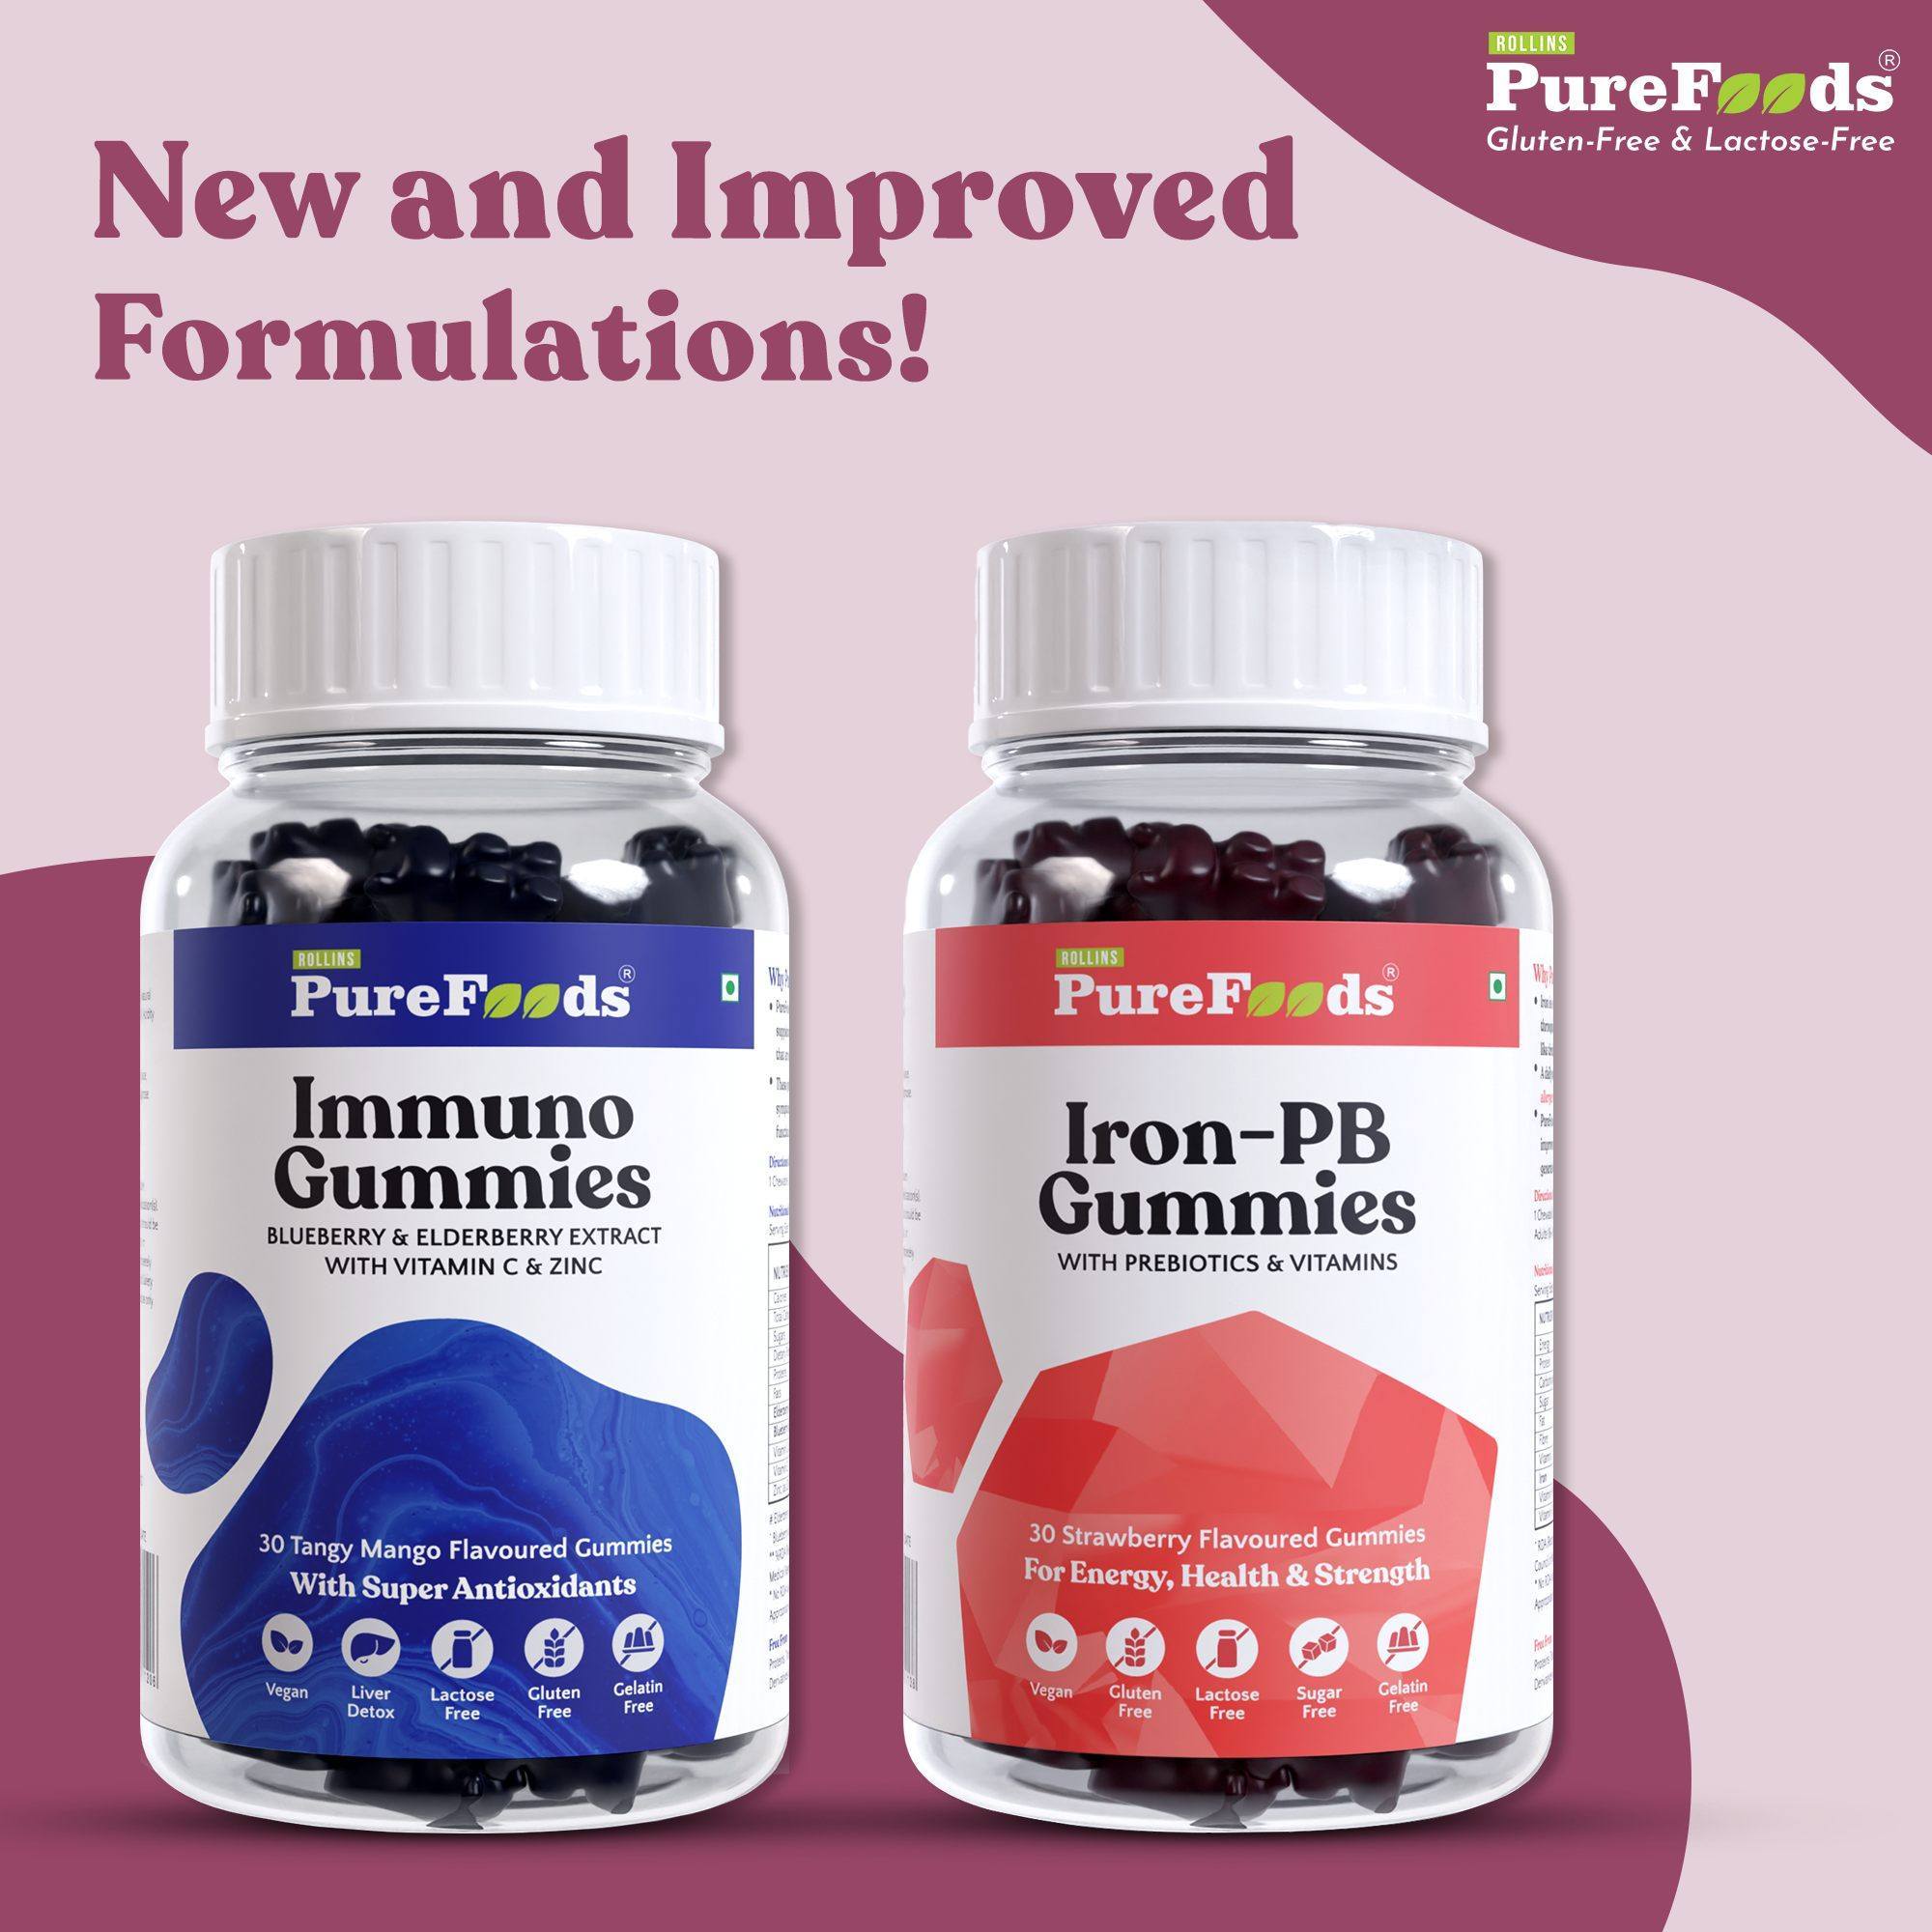 🍓 Boost Your Immunity and Fuel Your Body with PureFoods' New & Improved Daily Gummies! 🥭

✨ We're re-introducing our super popular Immuno Gummies AND Iron Gummies, now with newly enhanced formulations for even better results - and a brand new look to boot! Together, these gummies are the ultimate power-packed duo that'll keep the whole family feeling amazing! 💪✨

🍬 Individually wrapped for maximum safety and quality, our gummies are not only super convenient but also irresistibly tasty! Say goodbye to those boring old supplements and say hello to deliciously healthy daily treats! 😋

🌿 Formulated to be completely gluten-free, lactose-free, gelatin-free, vegan, and allergen-free, we've got everything covered! These gummies are easy on the stomach and offer best-in-class absorption, so you'll be able to feel the goodness seep into your body without any worries! 🙌💚

💊 Made with super antioxidant blueberry & elderberry extracts, and packed with essential vitamins & minerals, PureFoods Immuno Gummies will give your immune system the boost it needs to stay strong aand resilient - all year round! 🌟💥

🔥 And that's not all! PureFoods Iron Gummies are a totally natural and easy way to support healthy iron levels, helping you fight fatigue and stay energized throughout the day! 🏋️‍♀️⚡

💯 Elevate your wellness routine with PureFoods' New & Improved Gummies – the perfect combination of convenience & health for the whole family! 💯✨

🛒 Shop now and give your body the care it deserves! 💕 Visit our website at www.PureFoods.in or click the link in our bio to grab yourself some PureFoods goodness today! 🛍️💫

#PureFoods #GummyGoodness #BoostYourImmunity #IronPower #TasteAndHealth #WellnessJourney #GlutenFree #LactoseFree #GelatinFree #AllergenFree #QualityFirst #IronGummies #Immunity #ImmunoGummies #Gummies #Vitamins